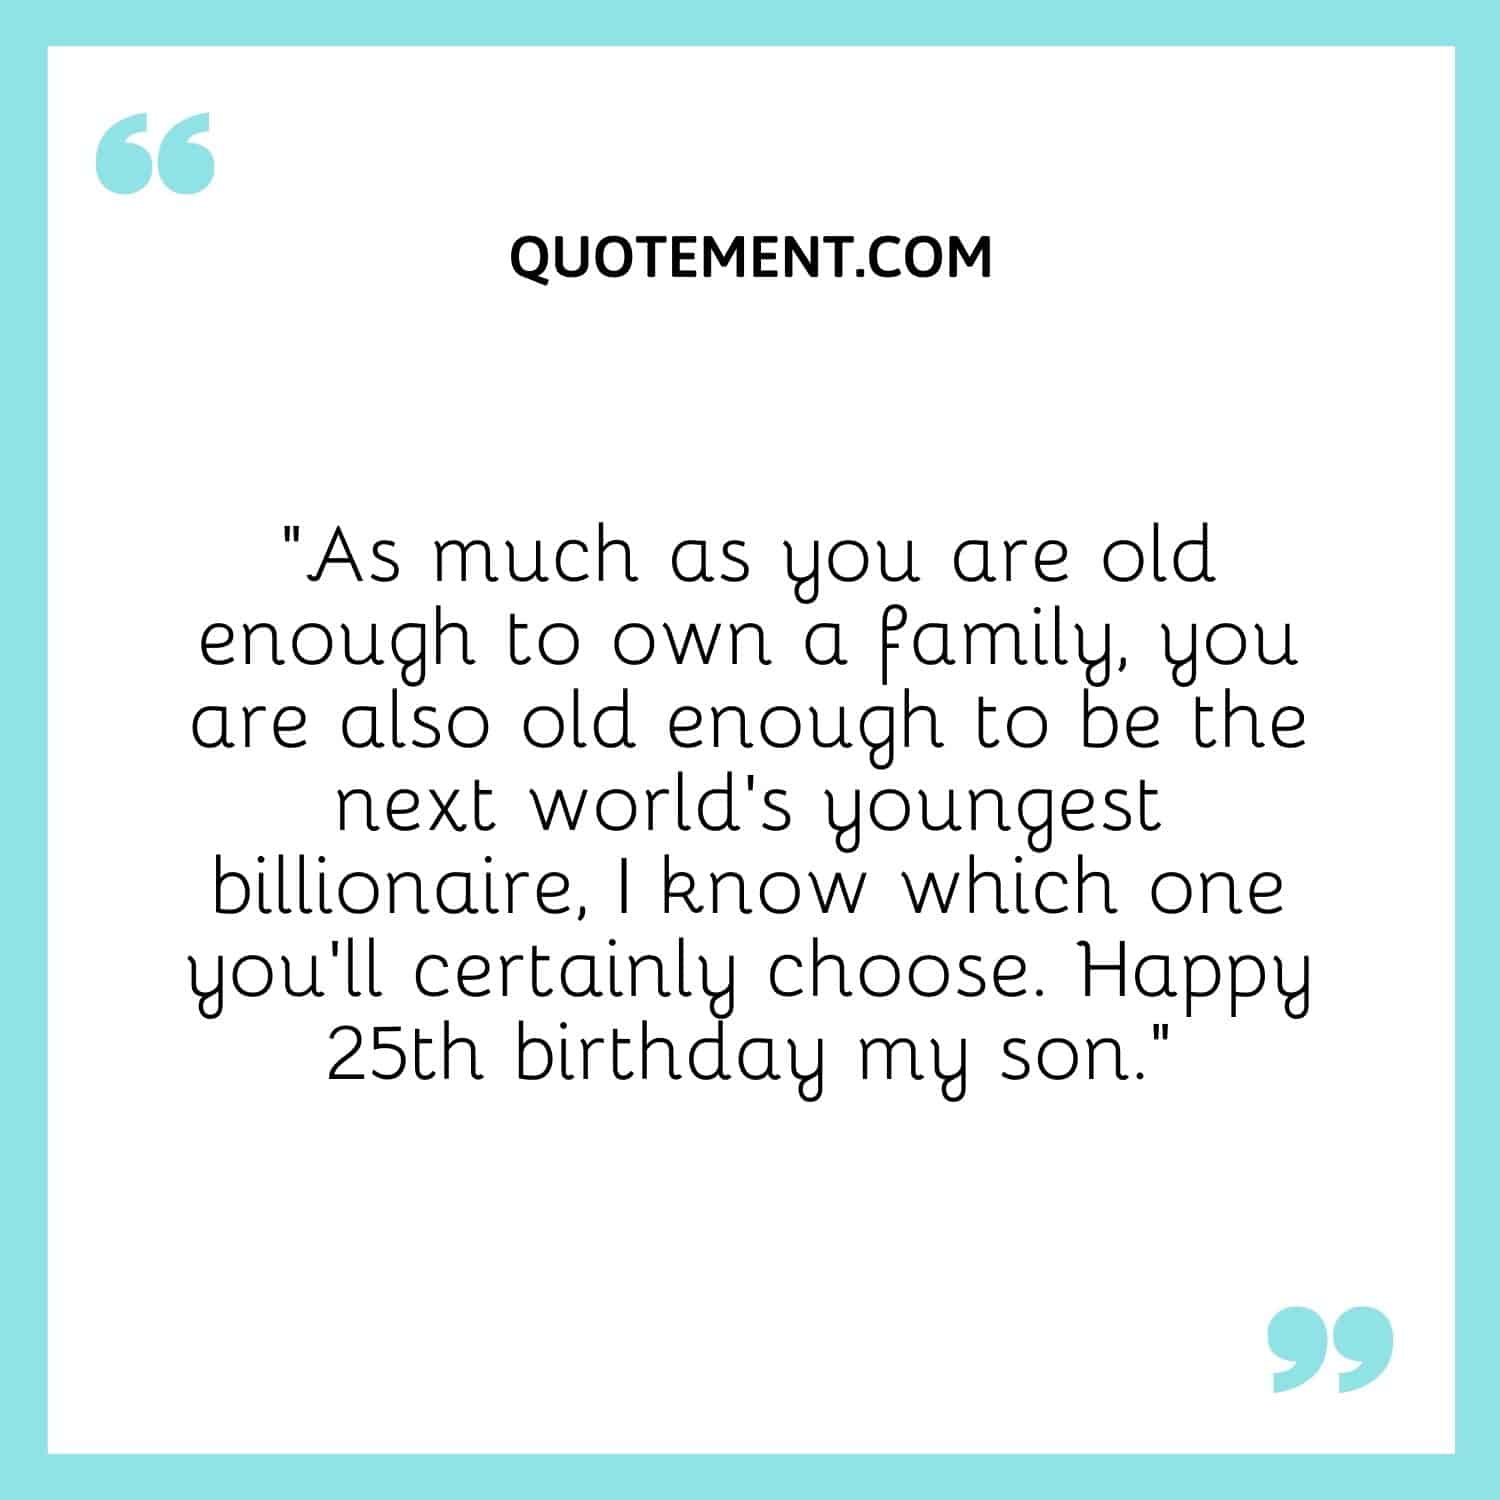 As much as you are old enough to own a family, you are also old enough to be the next world’s youngest billionaire